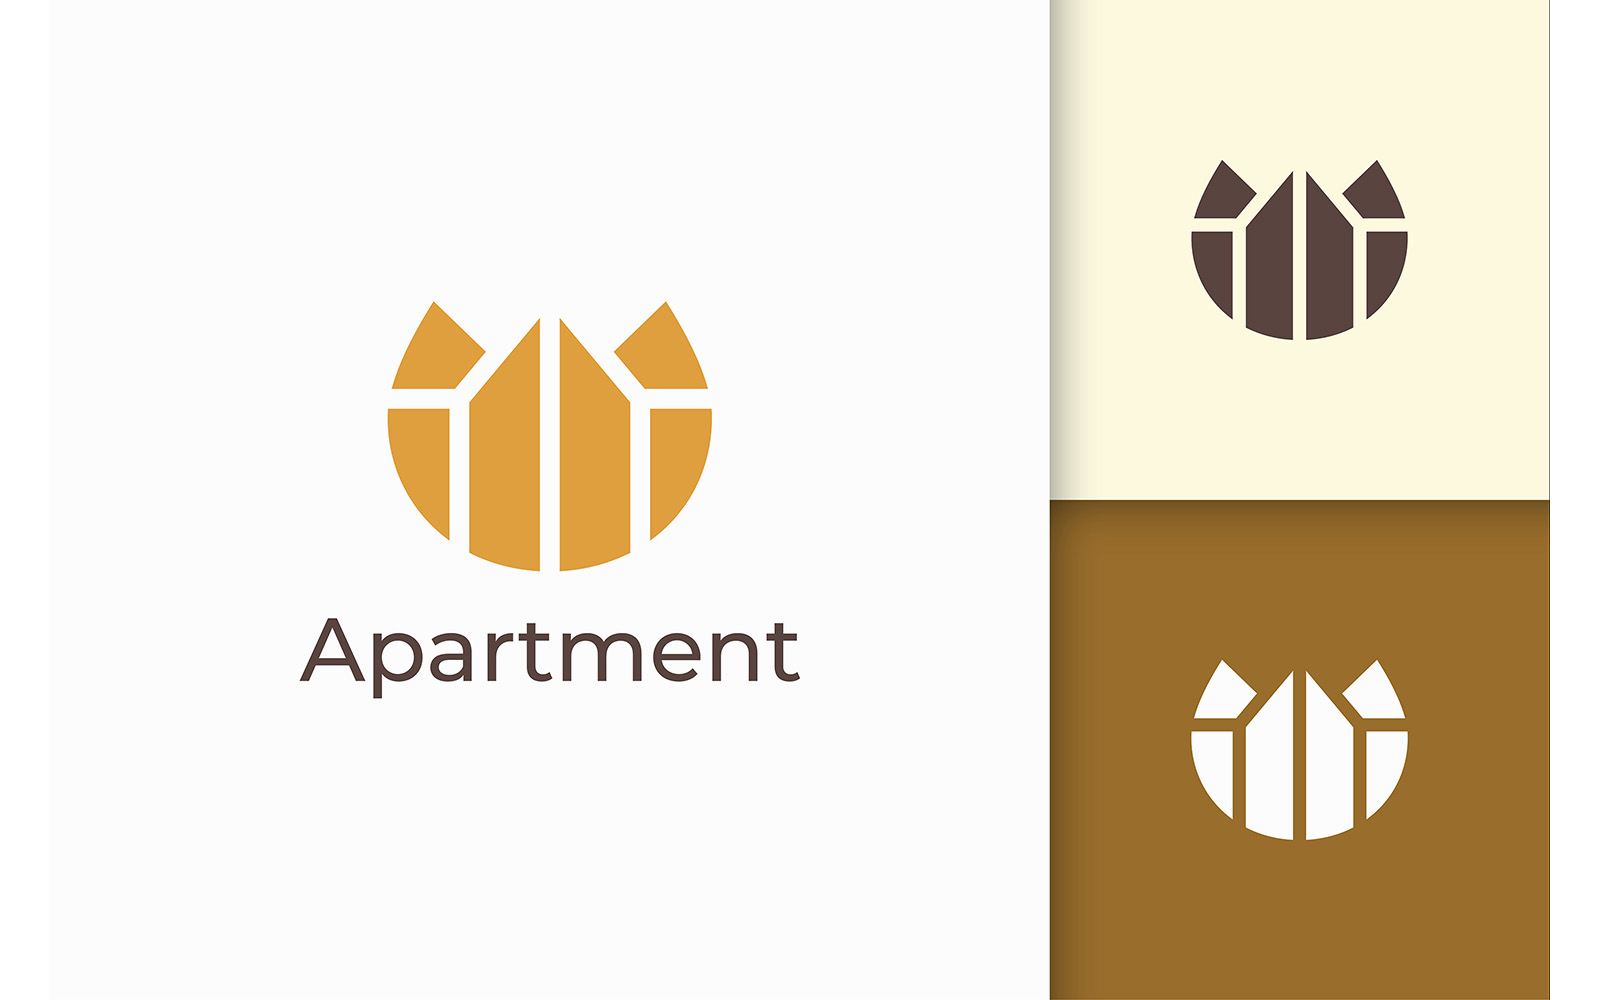 Simple Property or Apartment Logo